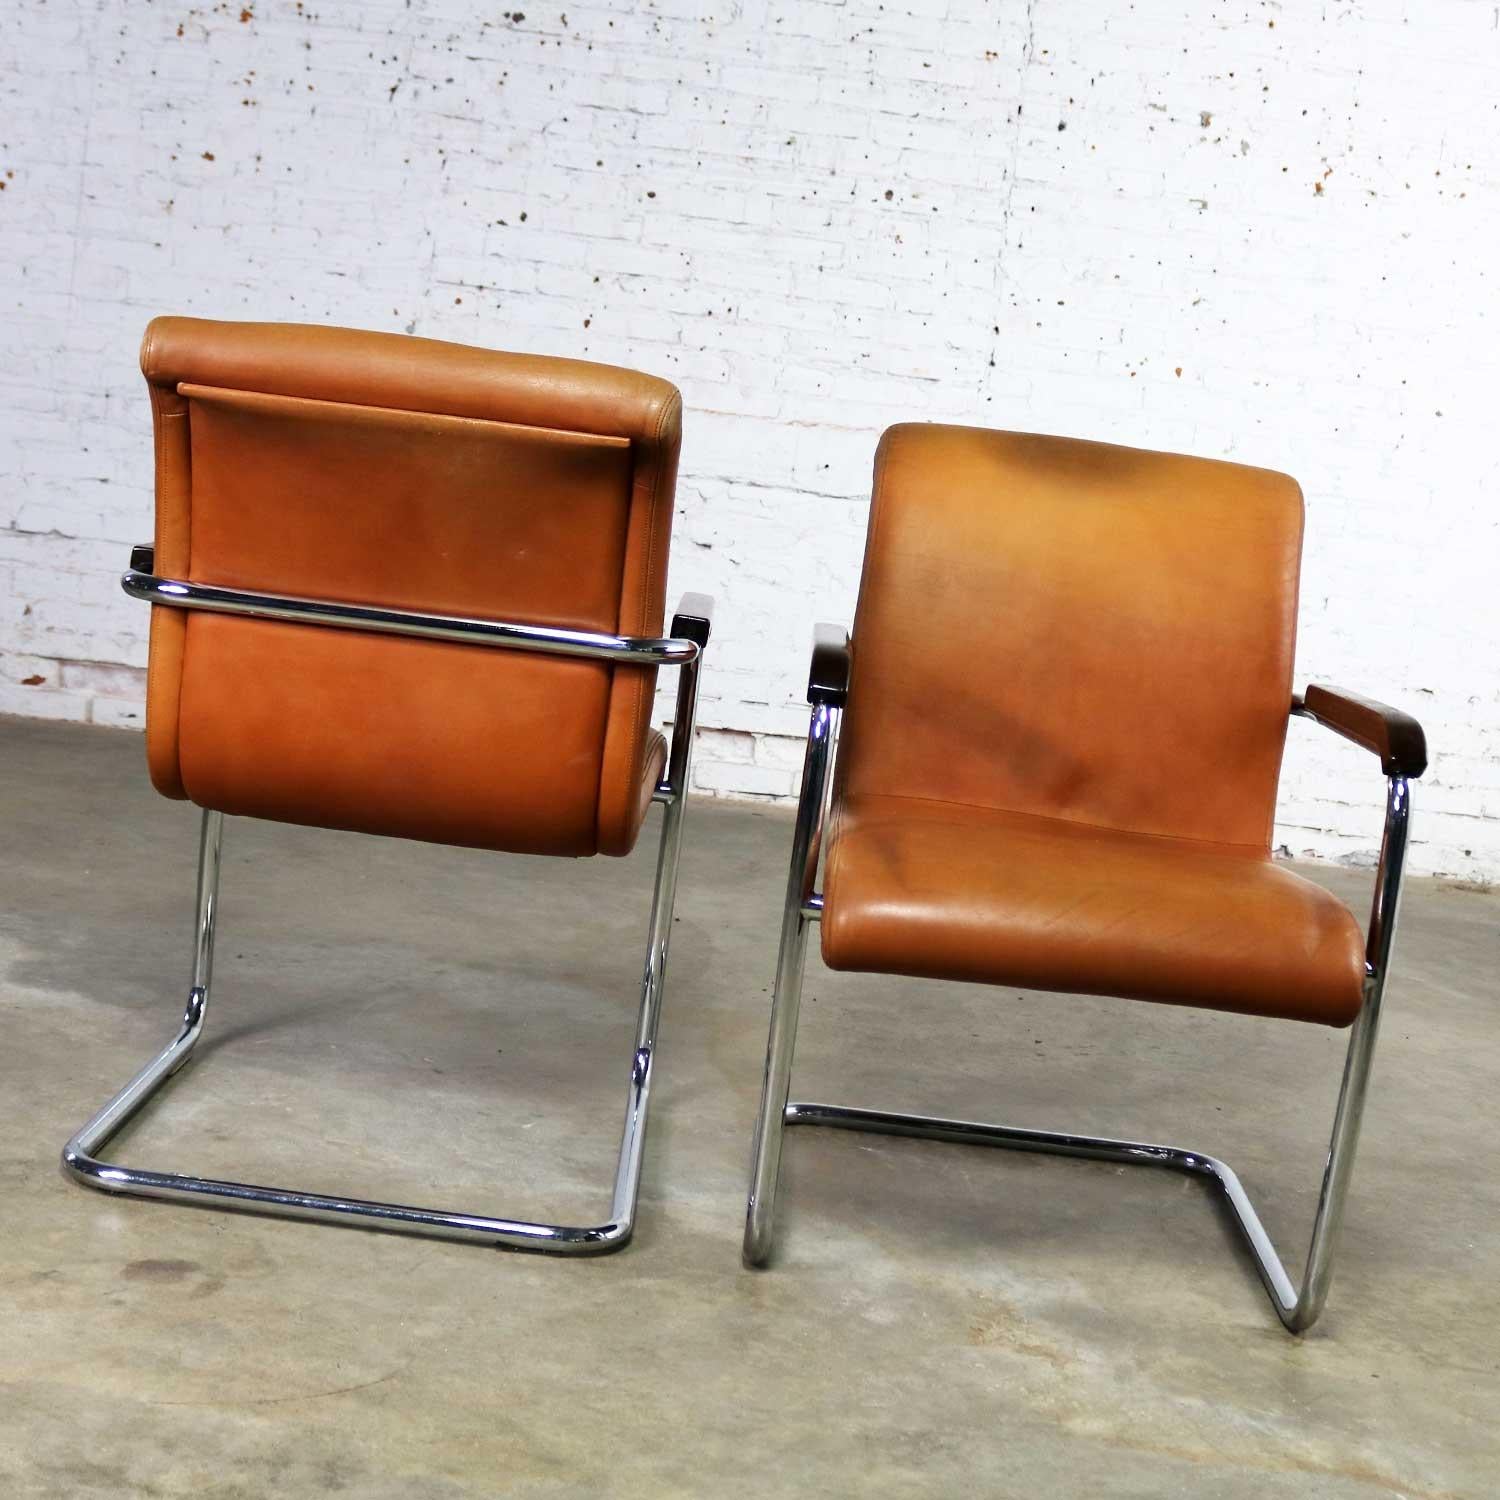 20th Century Cantilevered Chrome Cognac Leather Chairs Mid-Century Modern